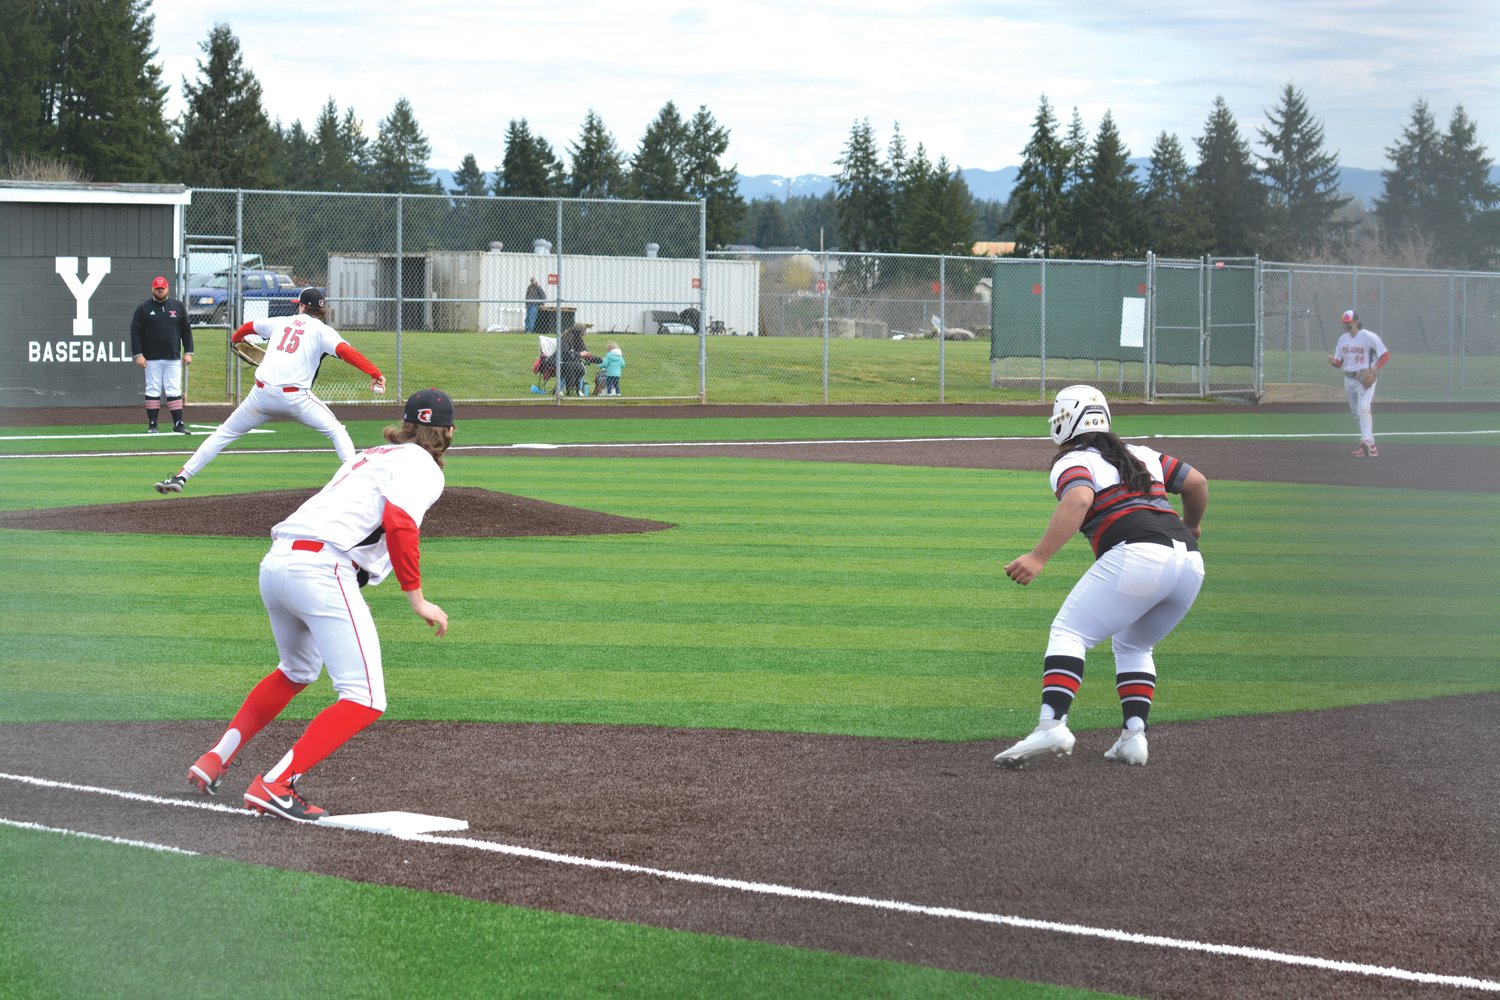 Junior third baseman Kolby Henry takes a lead on first while the pitch is delivered during a game against Steilacoom High School on April 1.